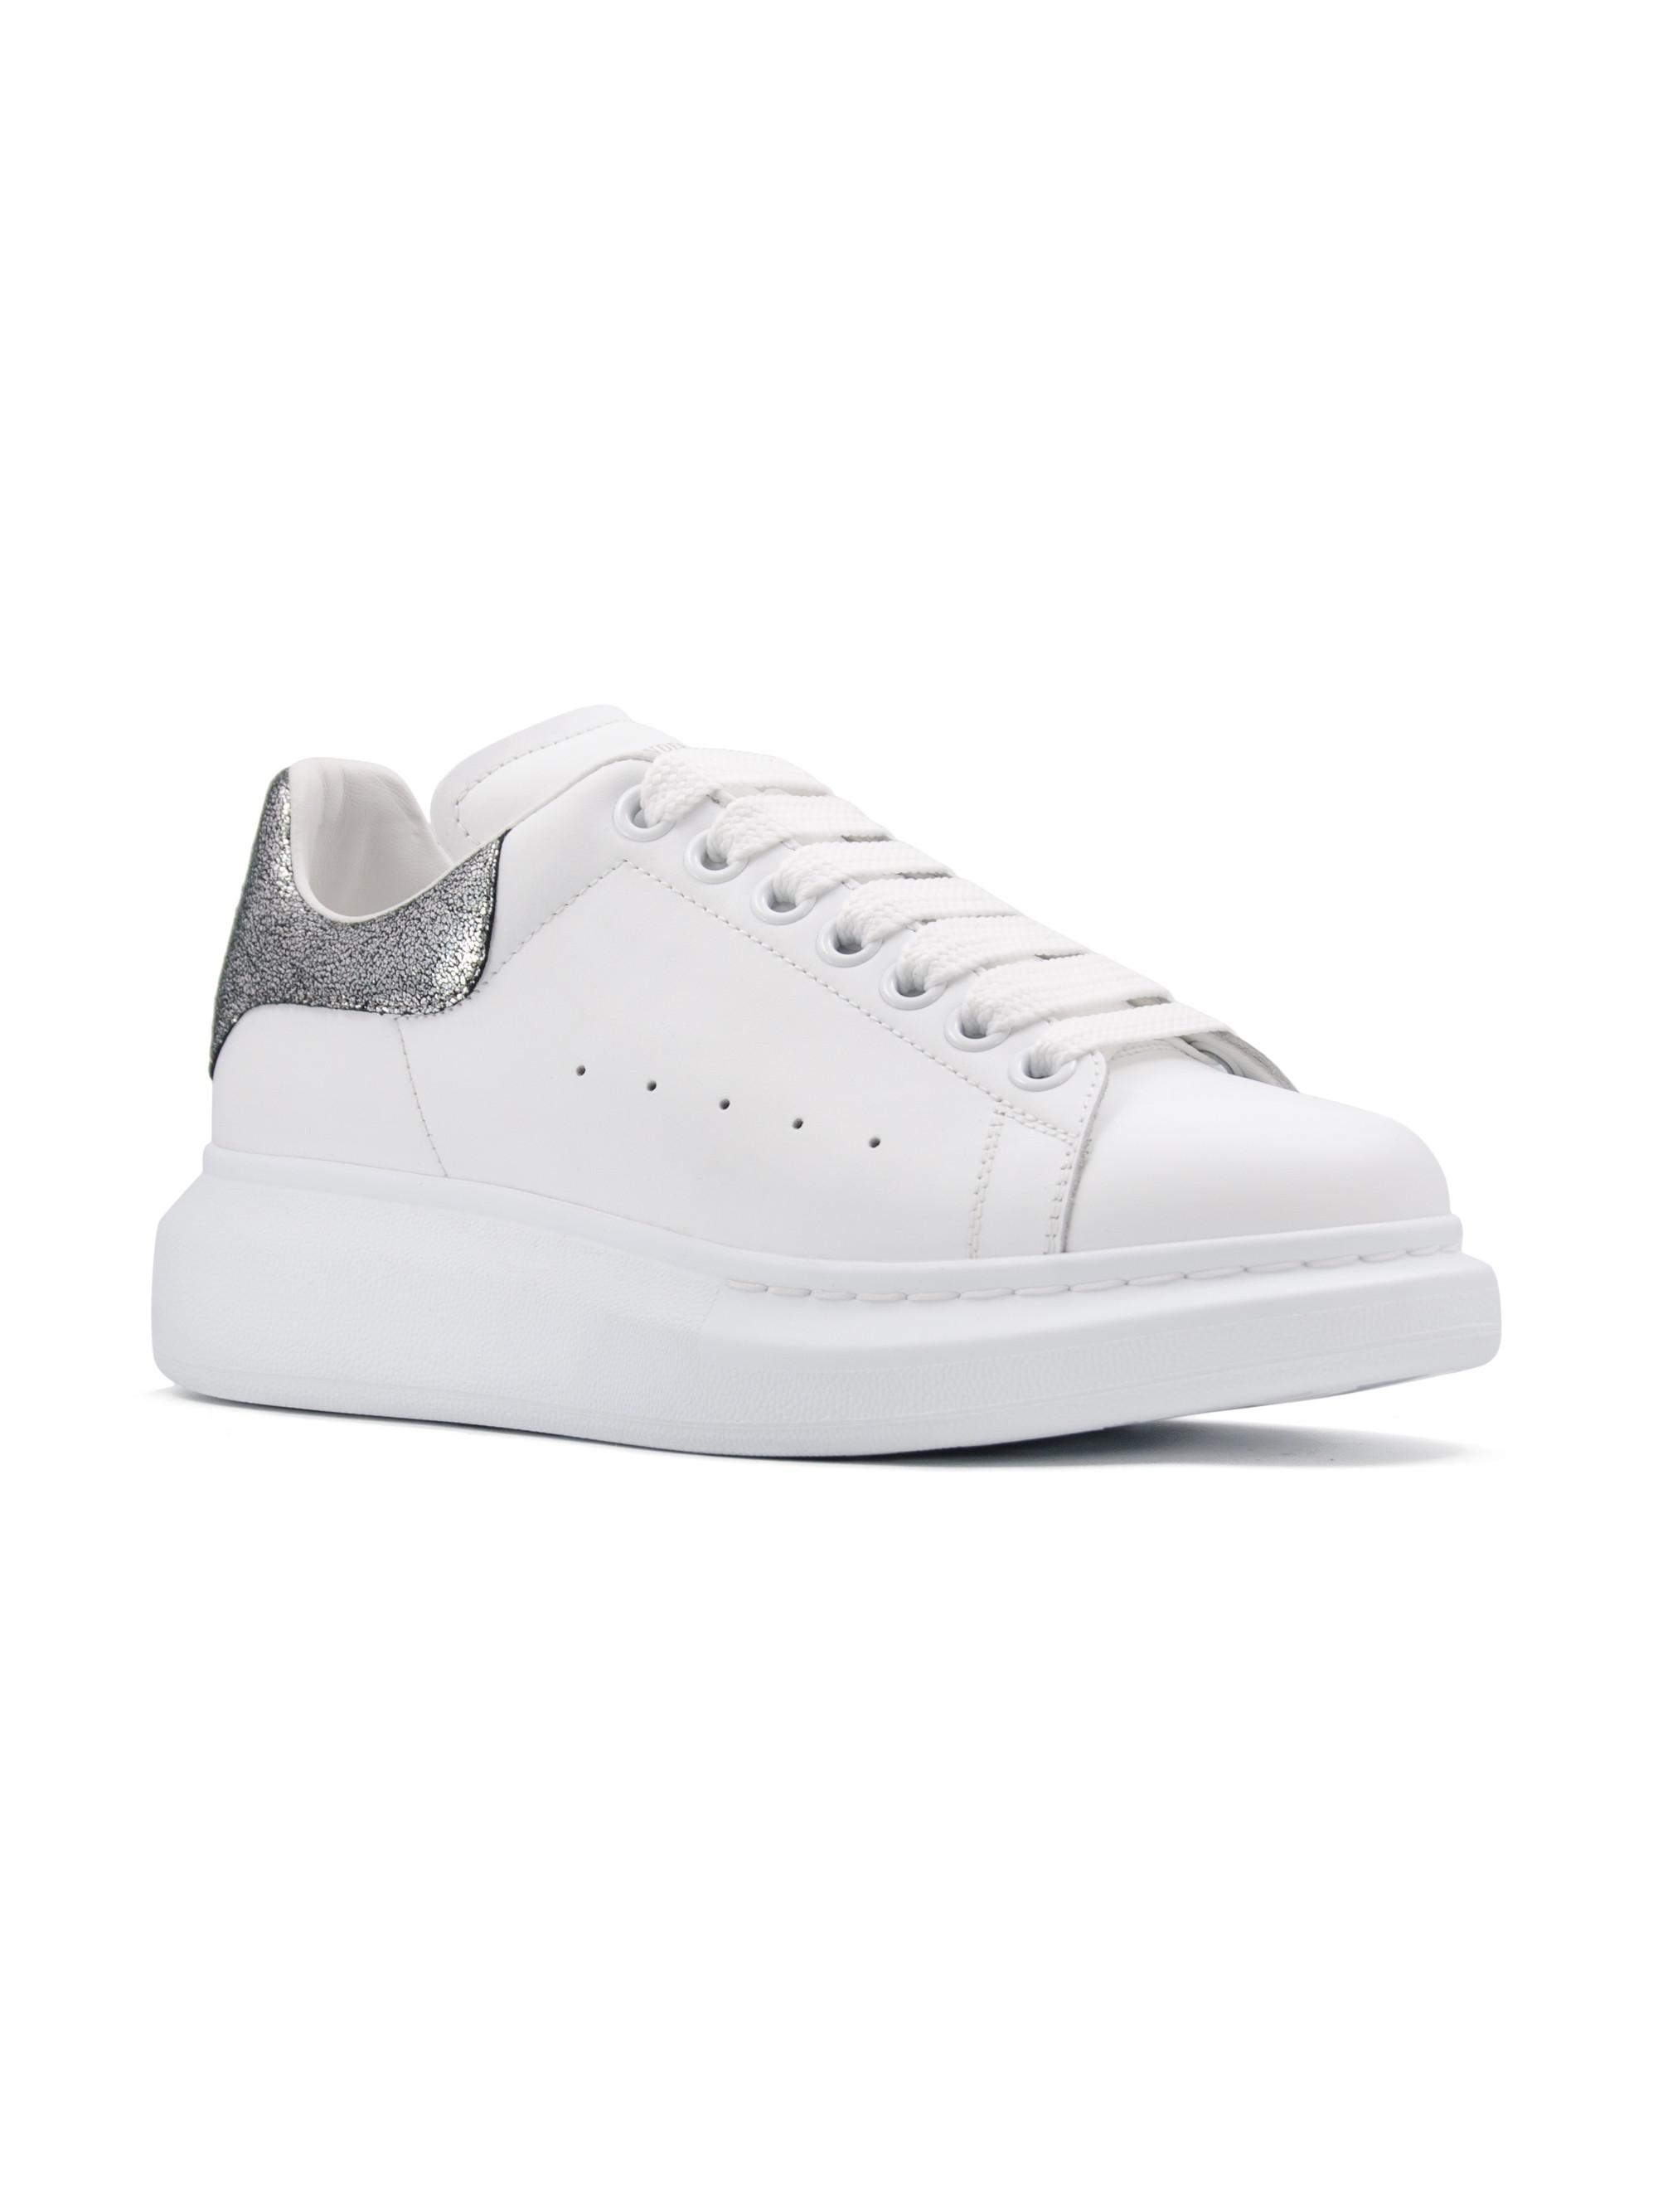 Lyst - Alexander Mcqueen Oversized Leather Sneakers in White